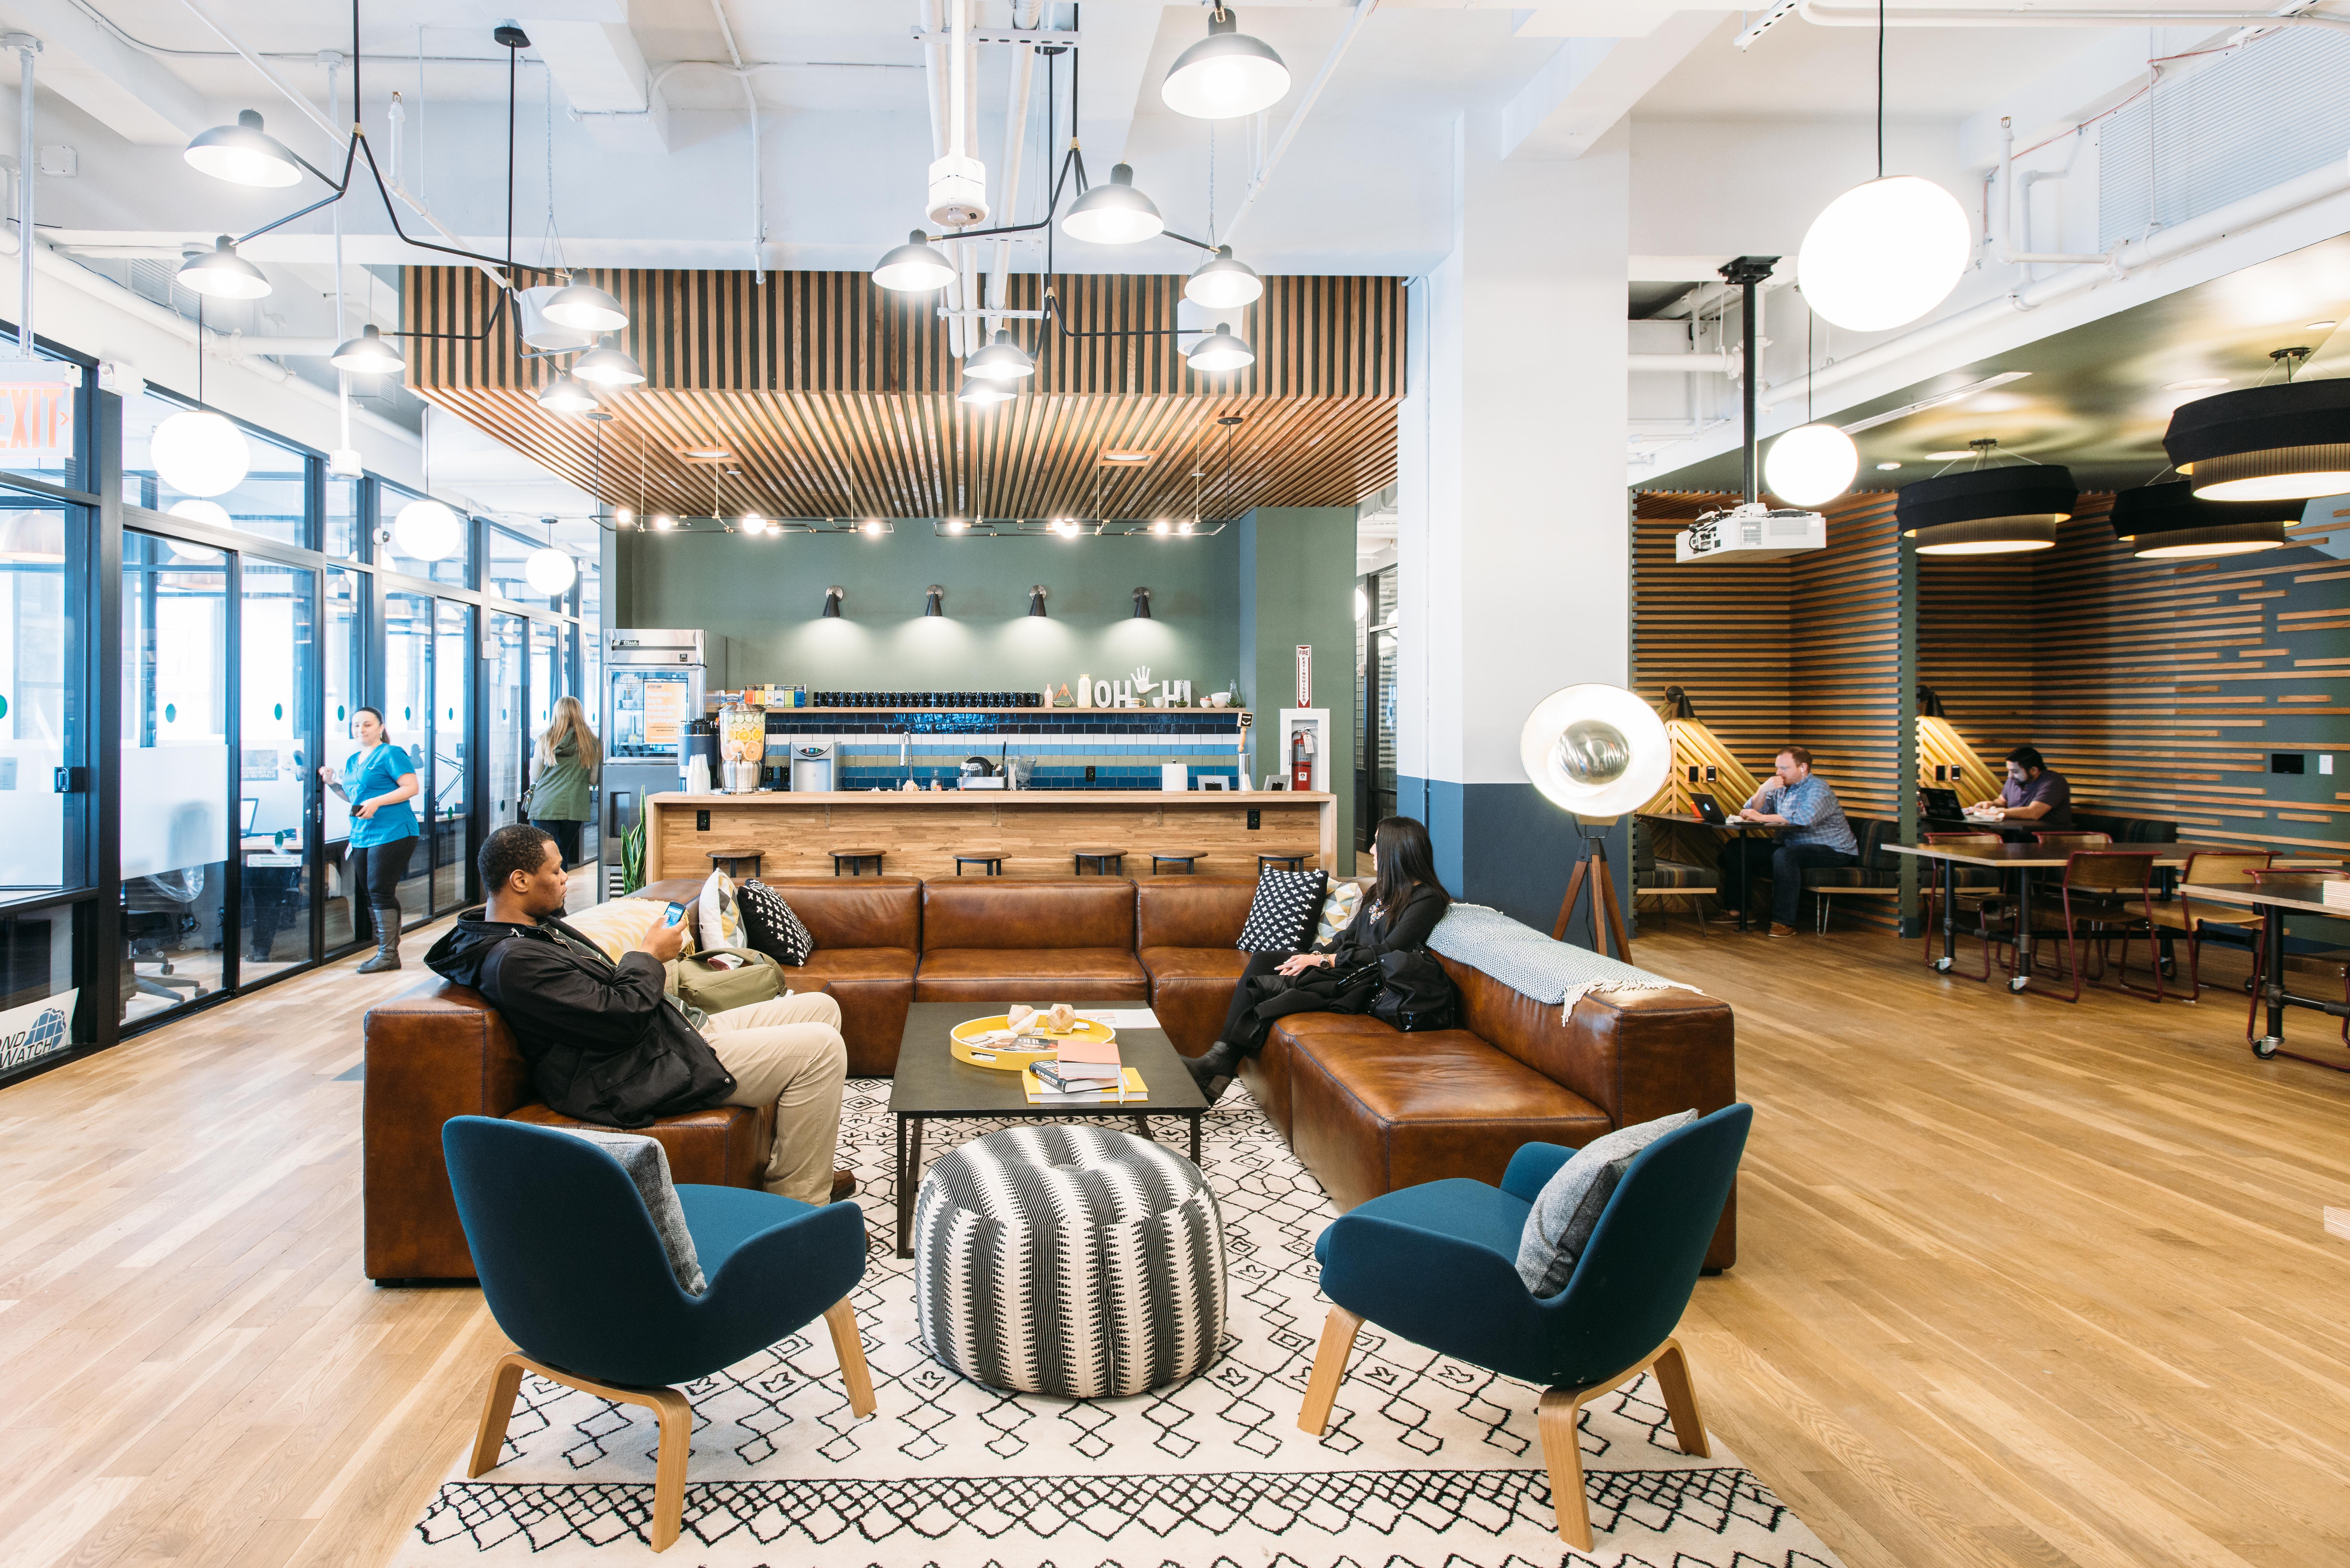 27 Best coworking. images | Coworking space, Office interiors